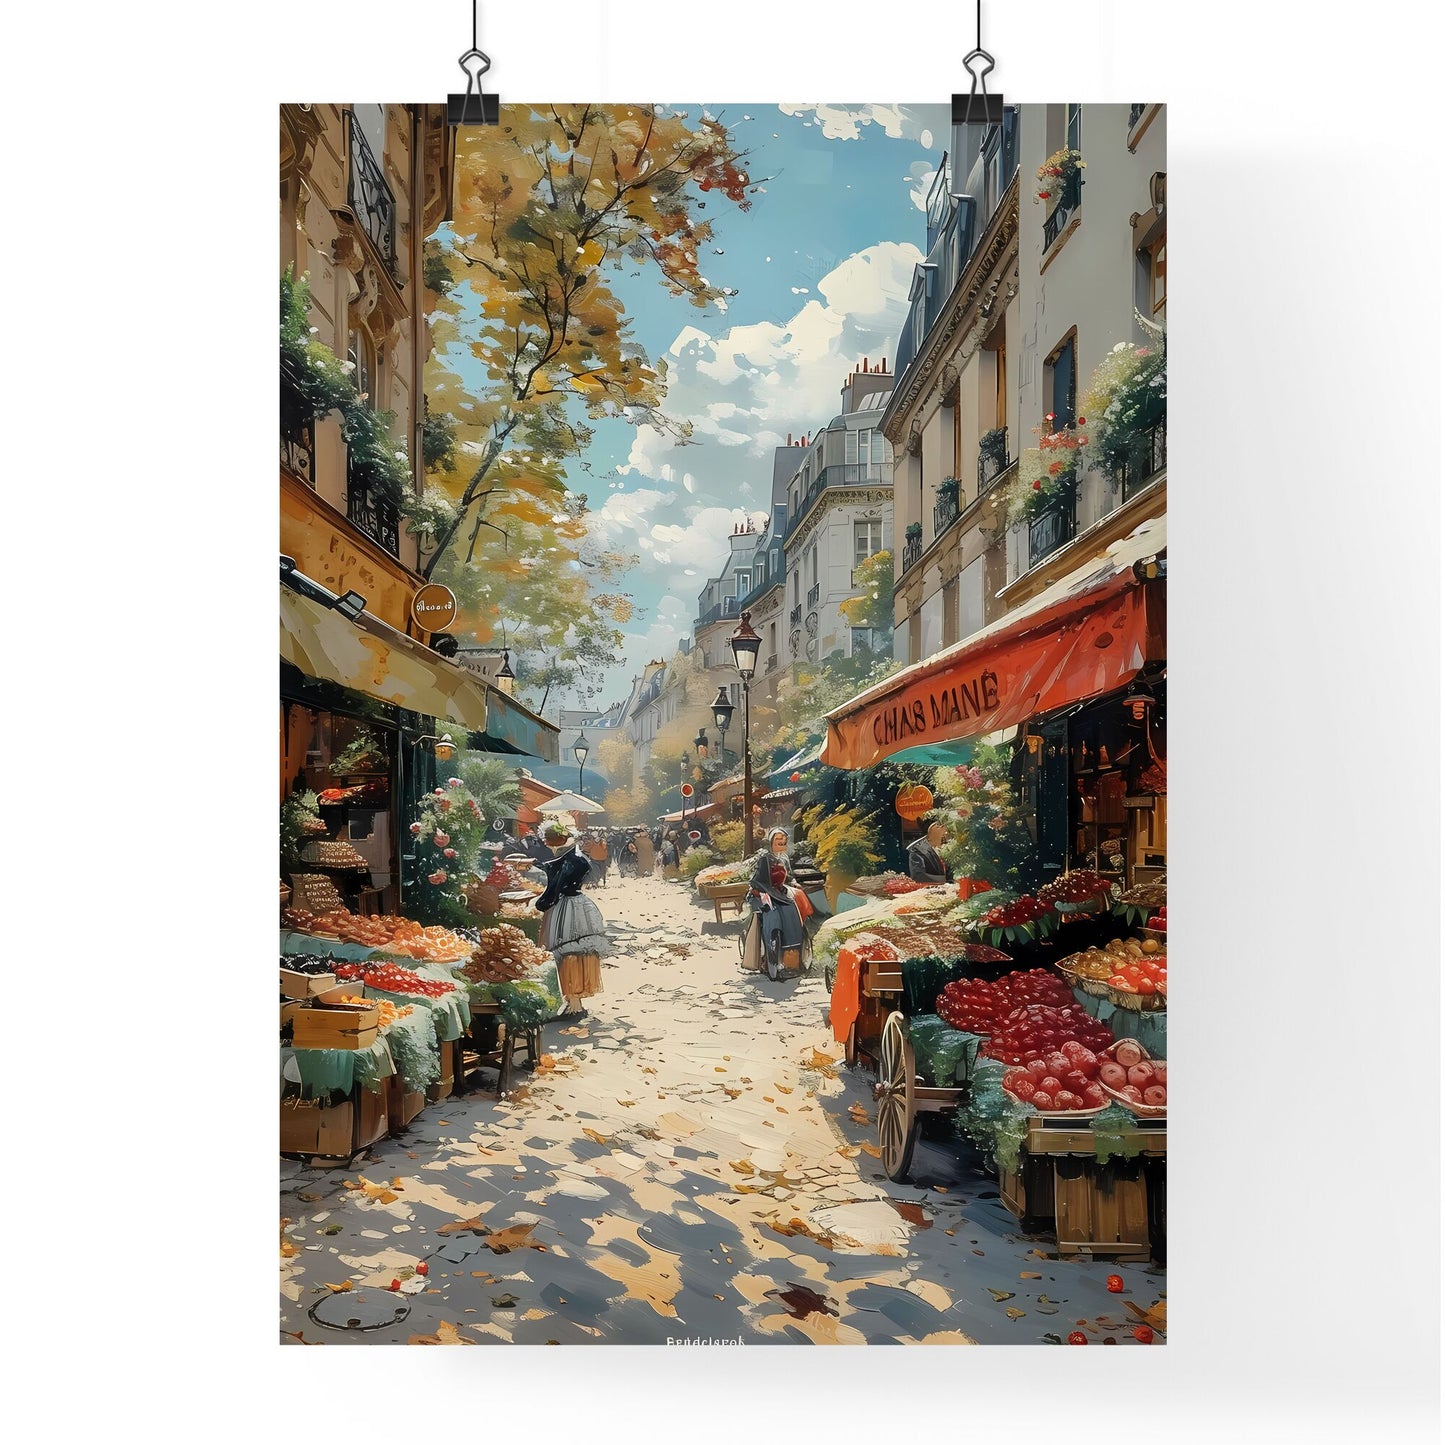 19th Century Paris Street Market Scene Depicting People and Market Stalls Selling Fruits and Vegetables with a Focus on Artistic Interpretation Default Title